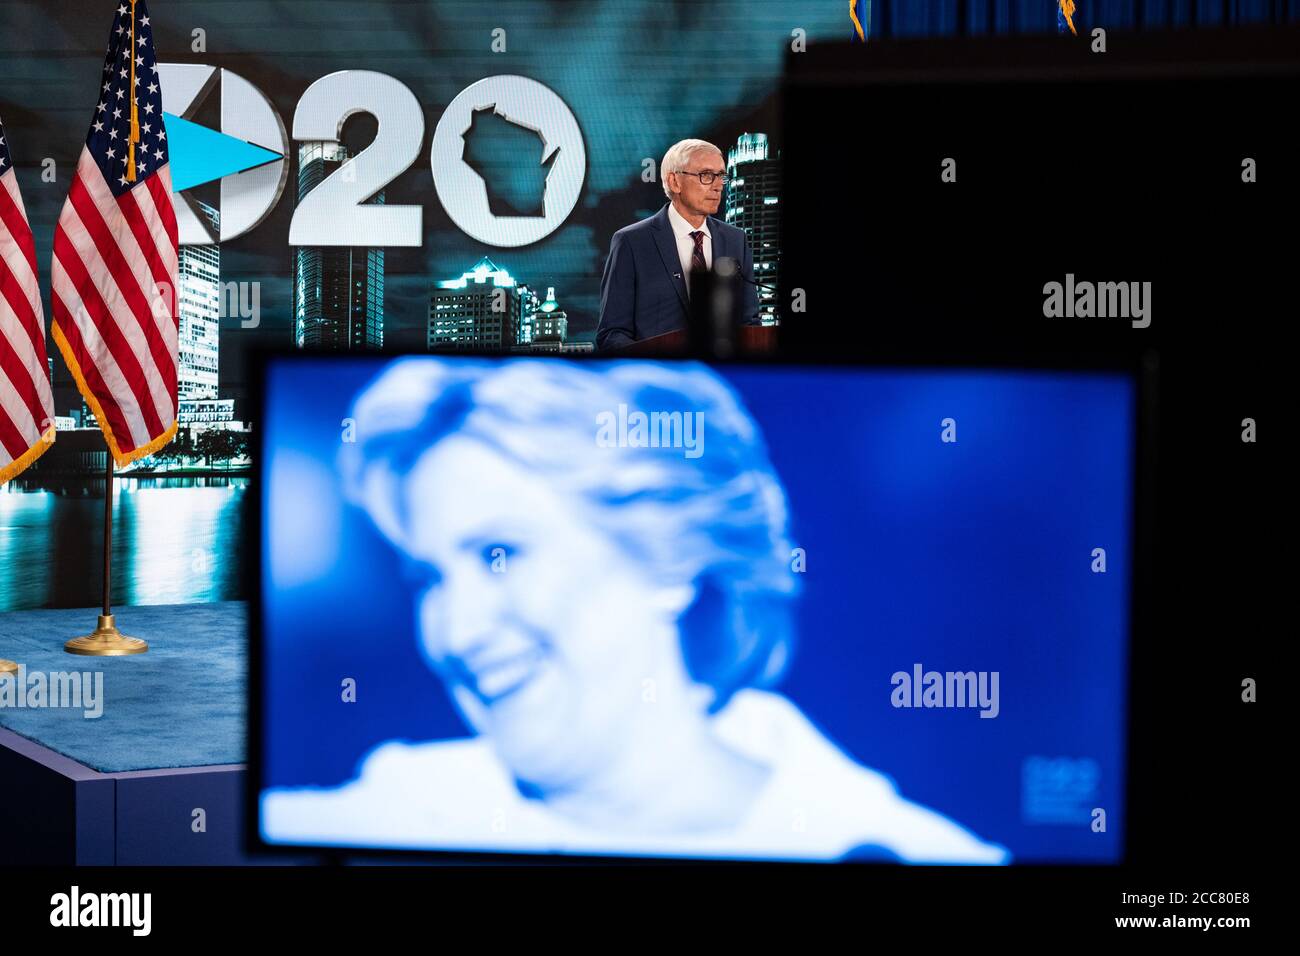 Washington, United States. 19th Aug, 2020. A video of former Senator Hillary Clinton is shown prior to Wisconsin Governor Tony Evers speaking at the Wisconsin Center during the third day of the Democratic National Convention on Wednesday, August 19, 2020 in Milwaukee, Wisconsin. Pool Photo by Stephen Voss/UPI Credit: UPI/Alamy Live News Stock Photo